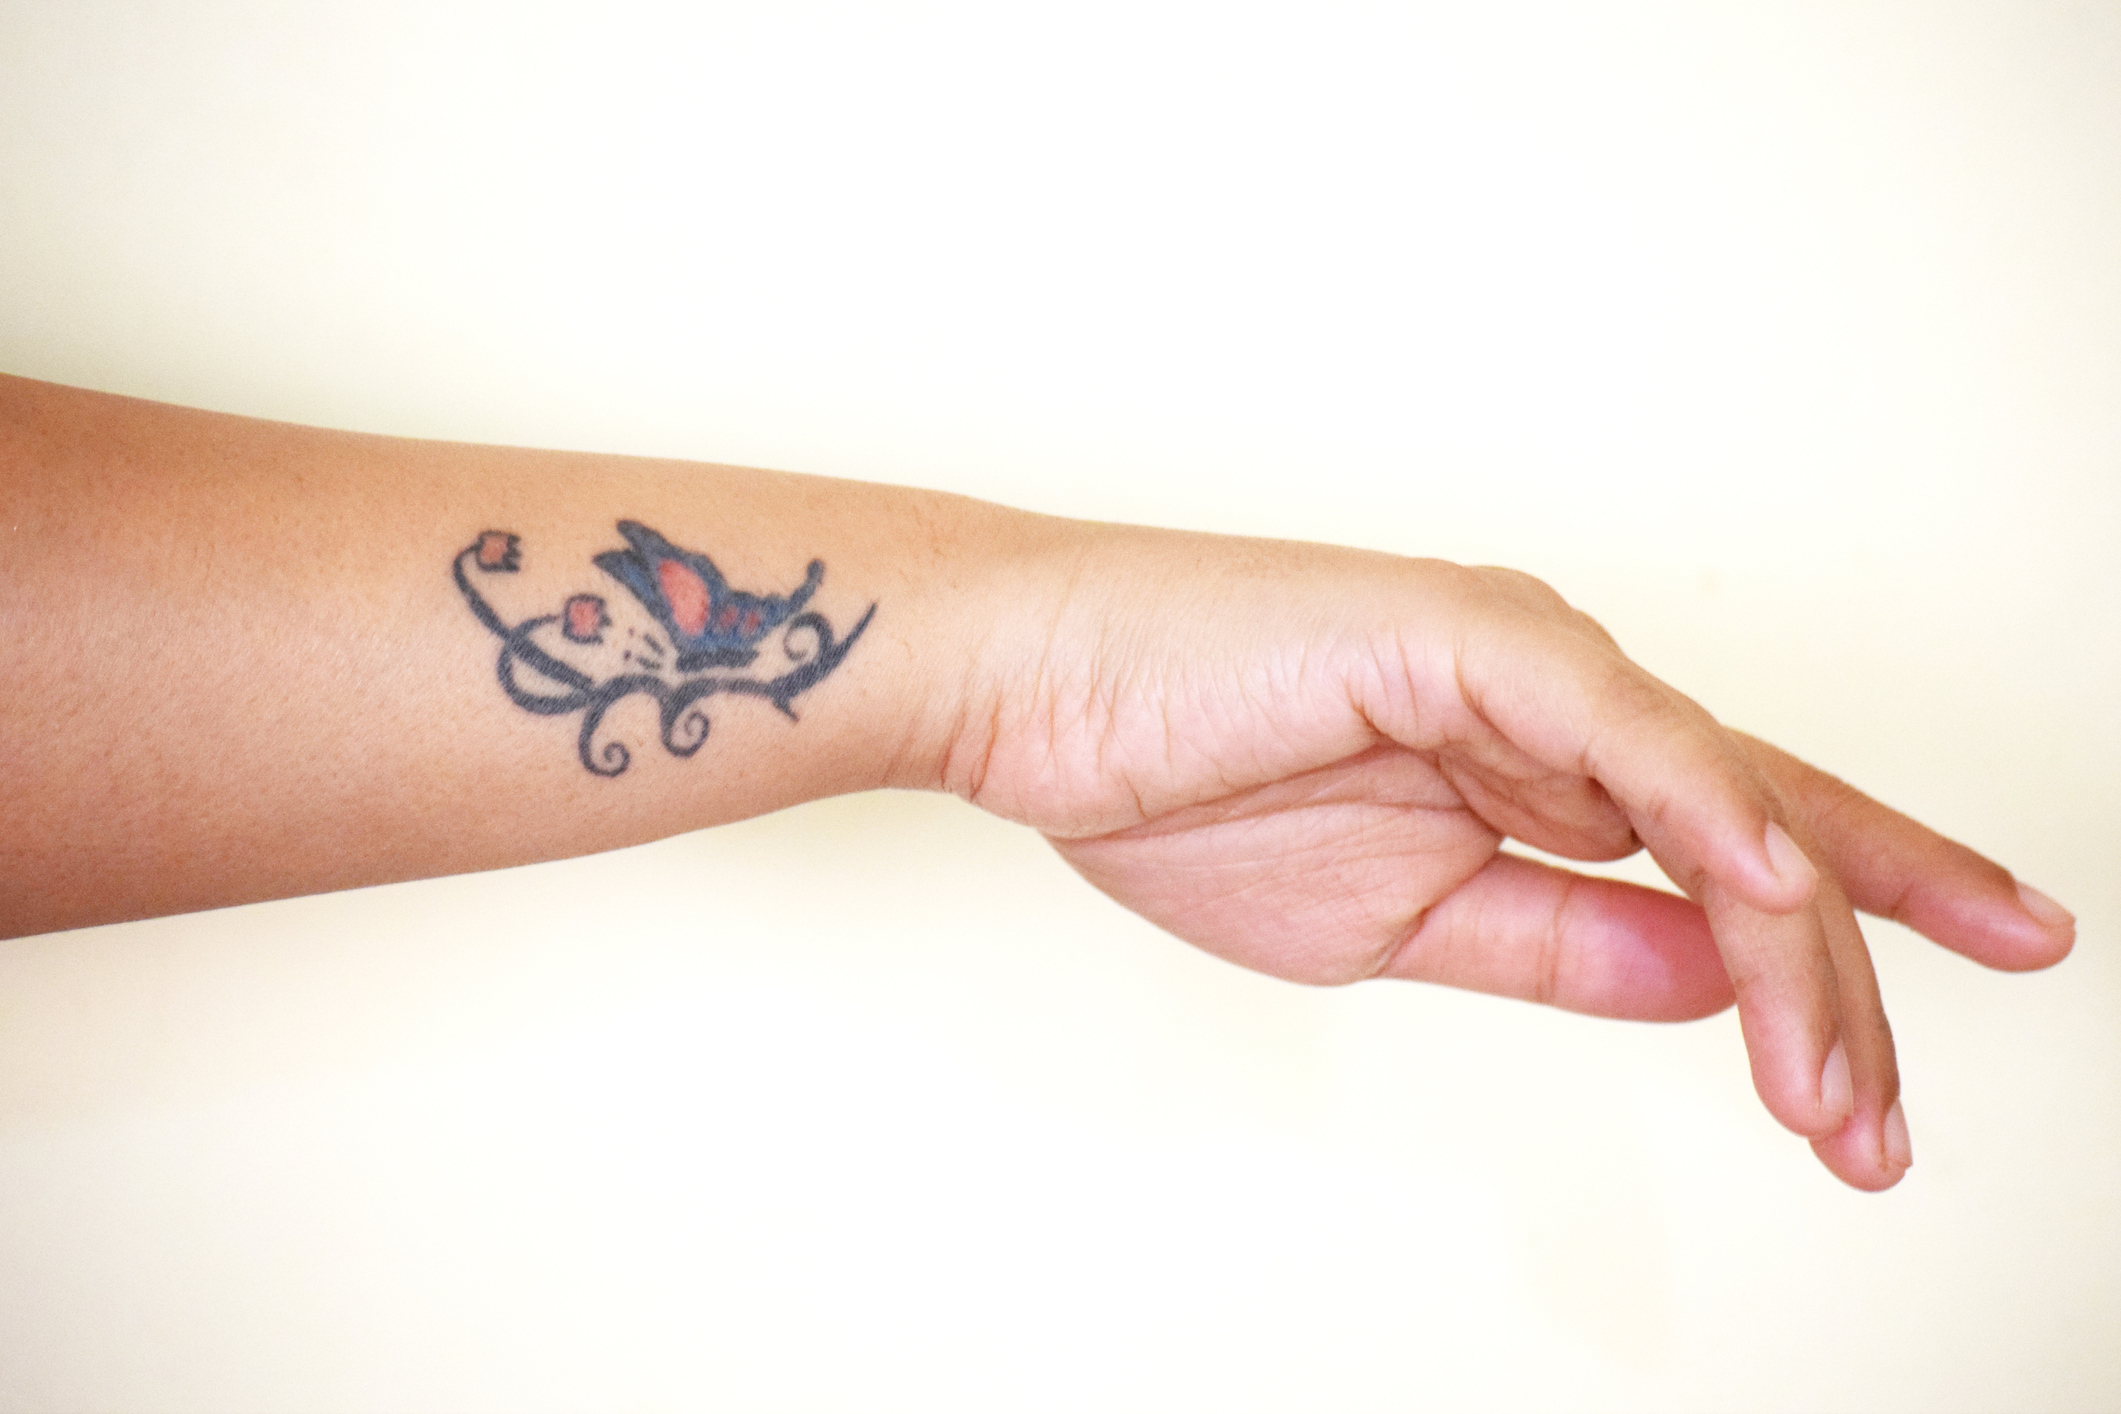 Flash Pain: Buy fake tattoos Designed by Tattoo Artists - Like ink